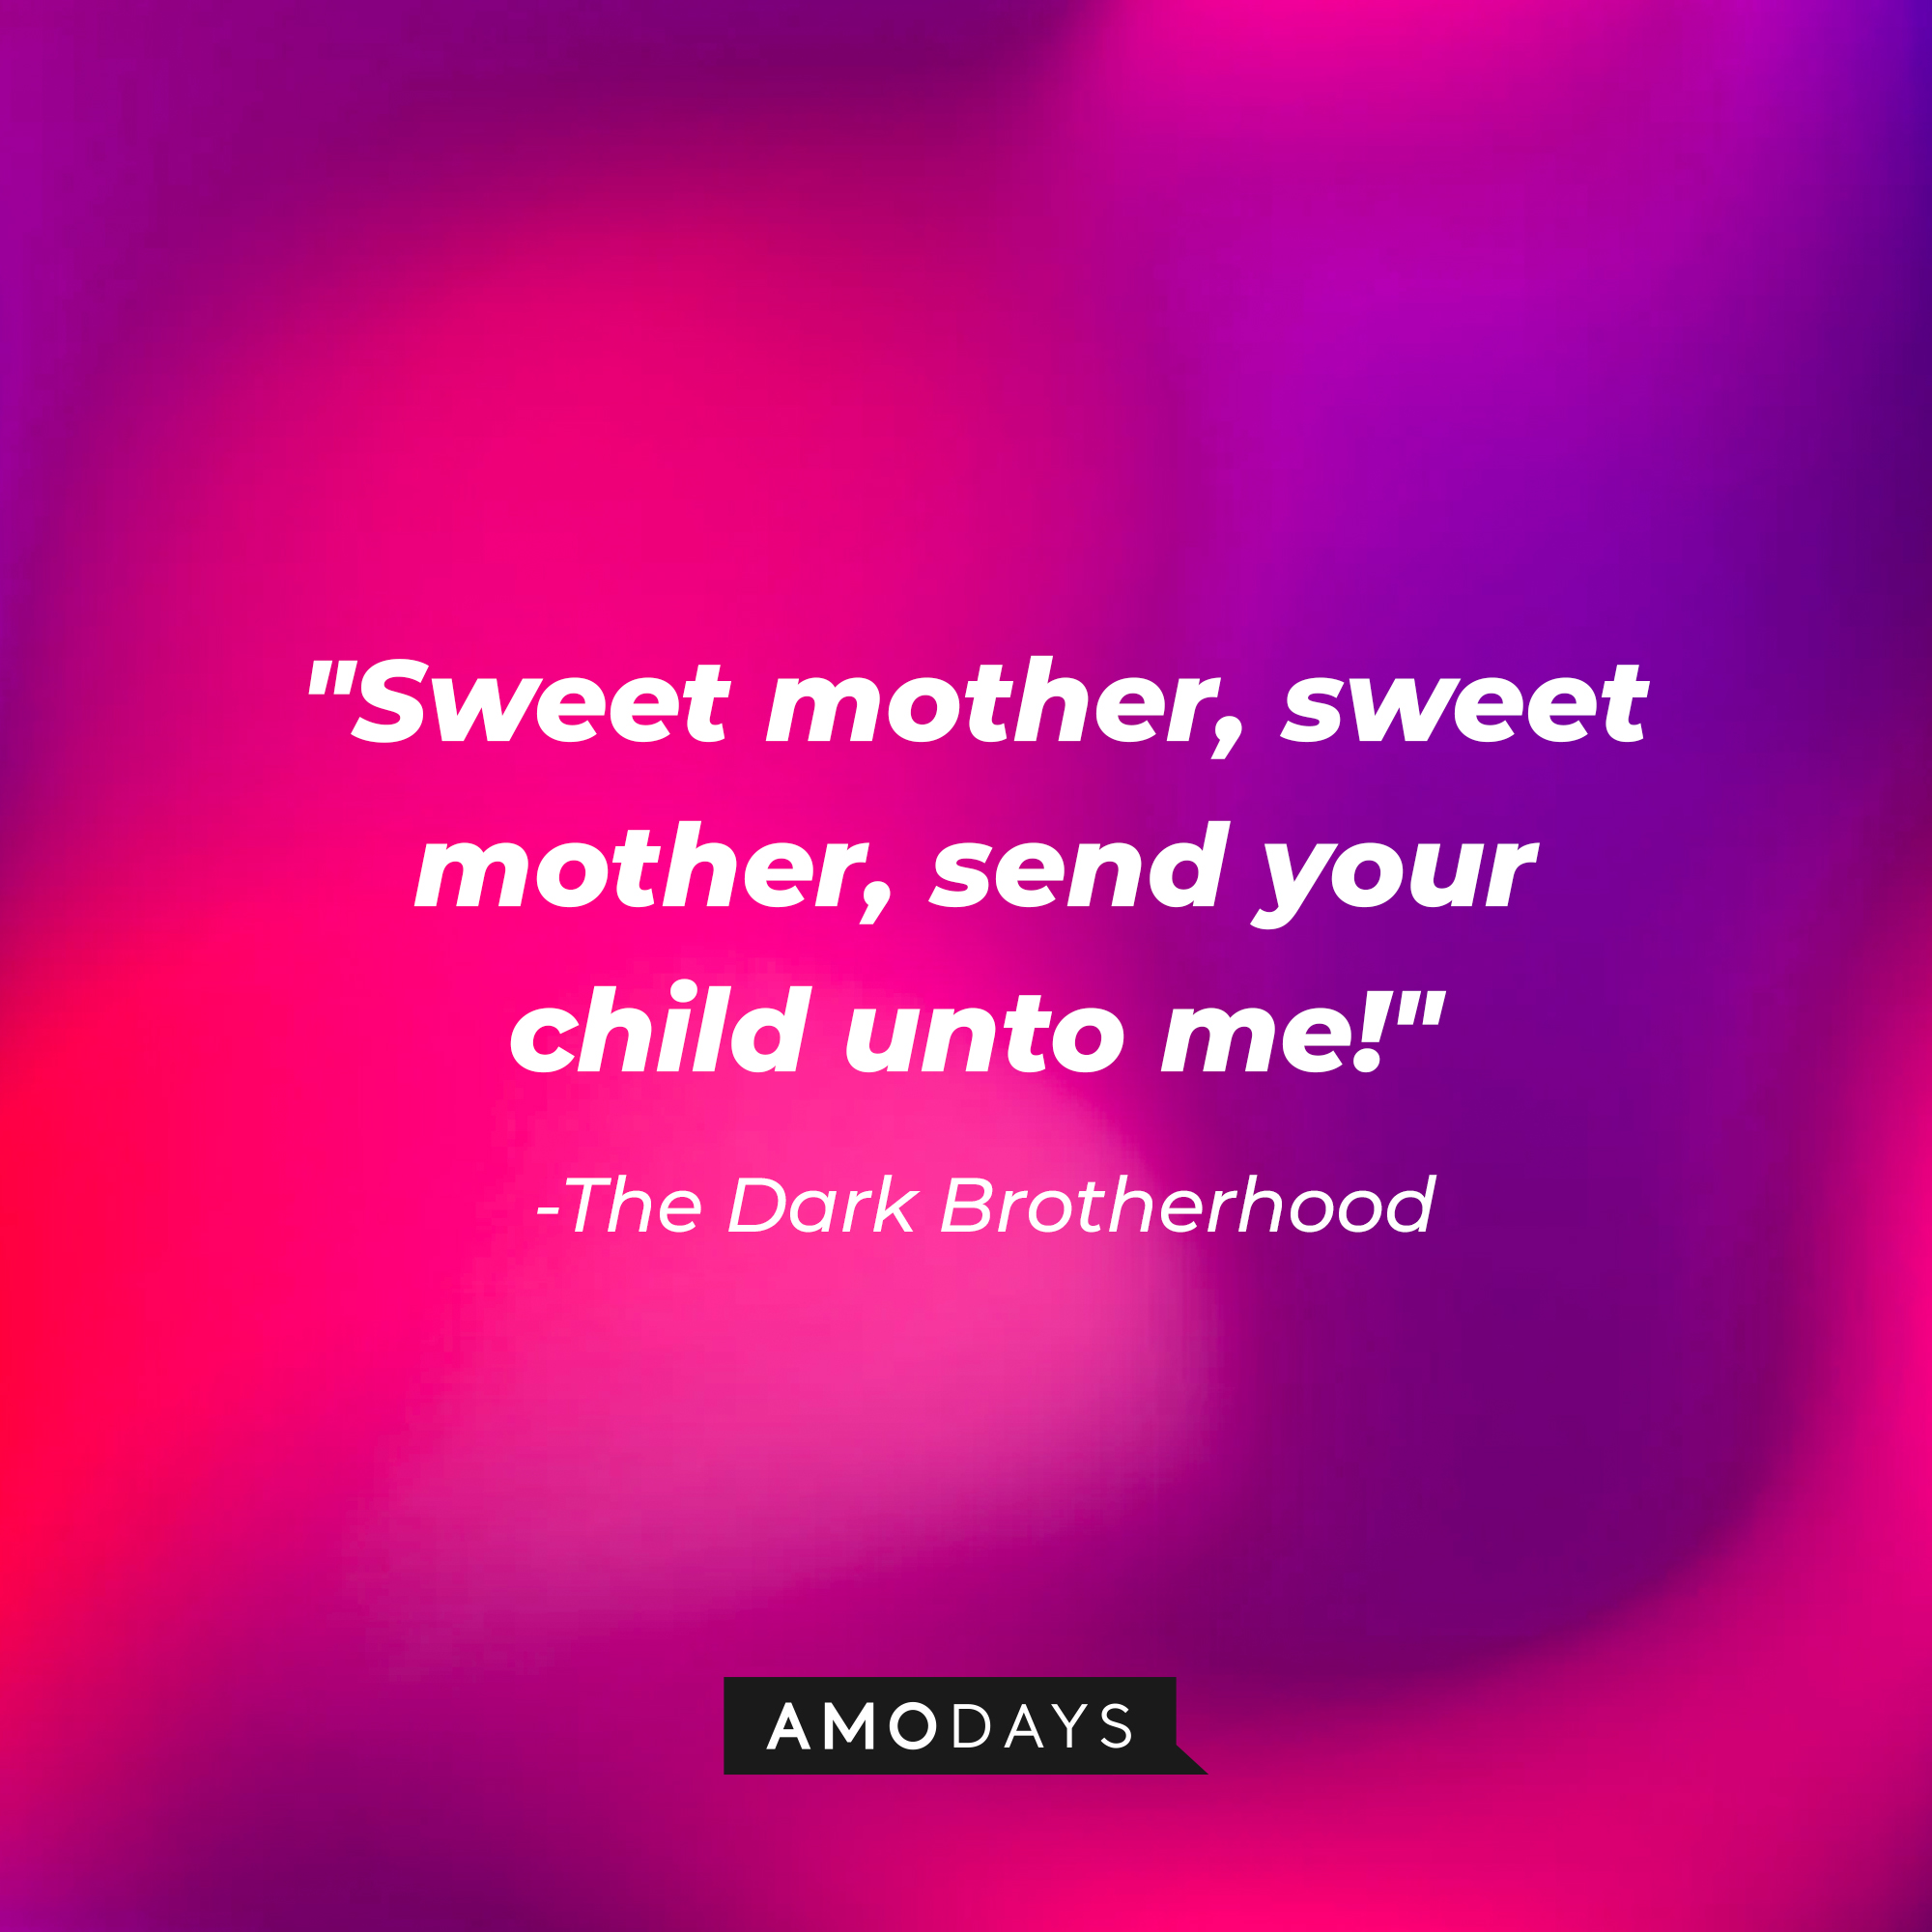 The Dark Brotherhood's quote: "Sweet mother, sweet mother, send your child unto me!" | Source: Amodays